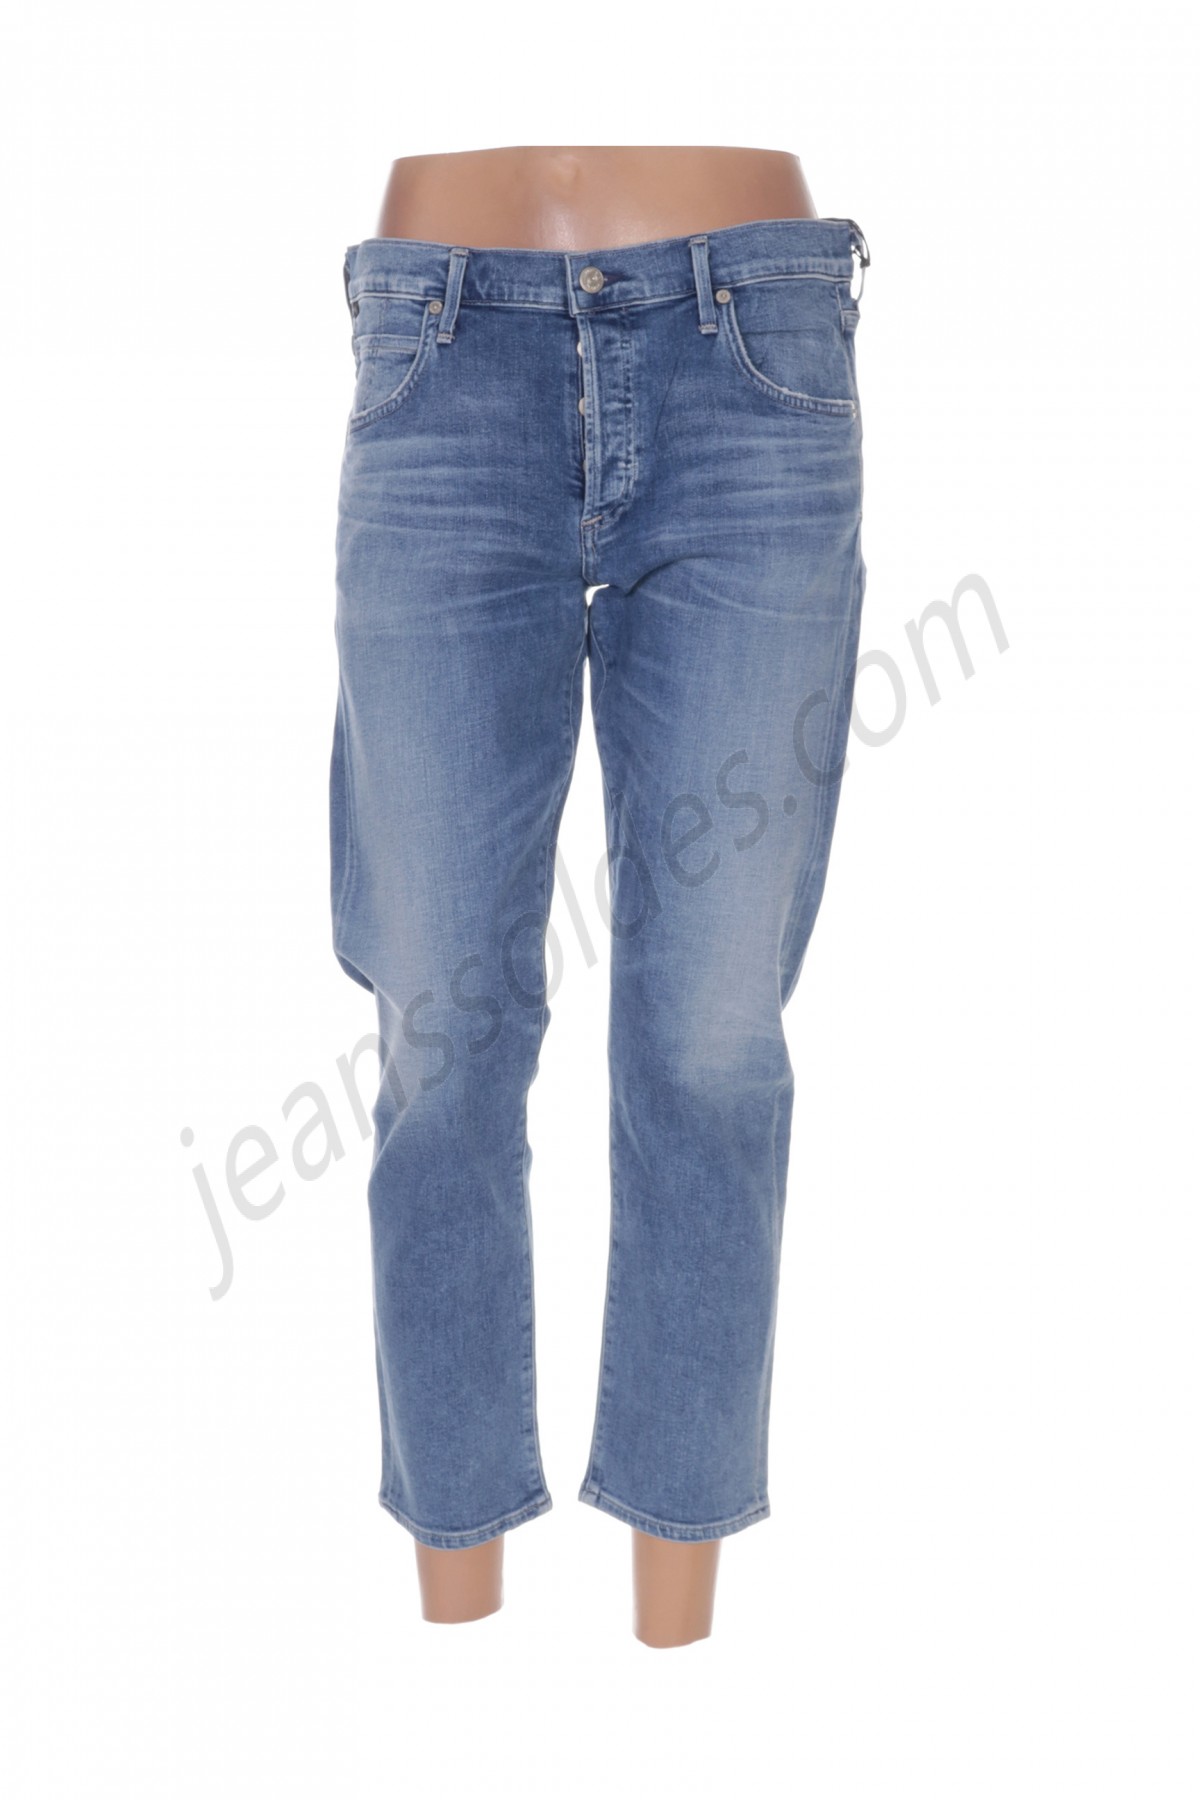 citizens of humanity-Jeans coupe slim prix d’amis - -0